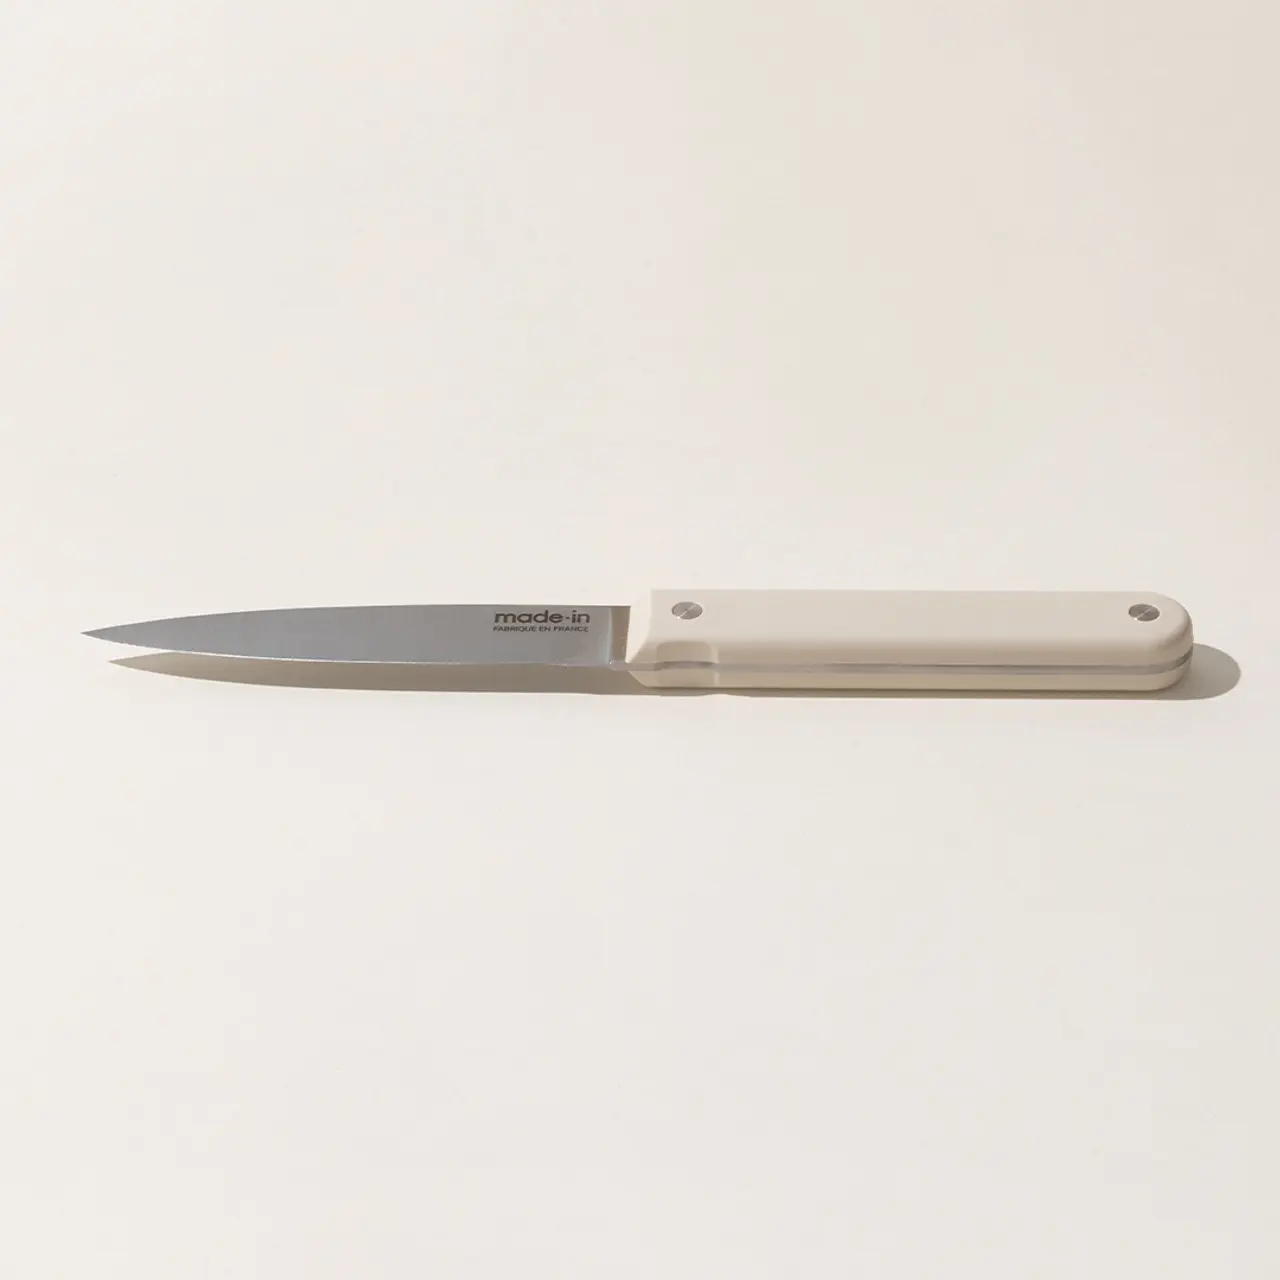 A simple kitchen knife with a white handle and silver blade, with the text "made in" on the blade, isolated against a plain background.